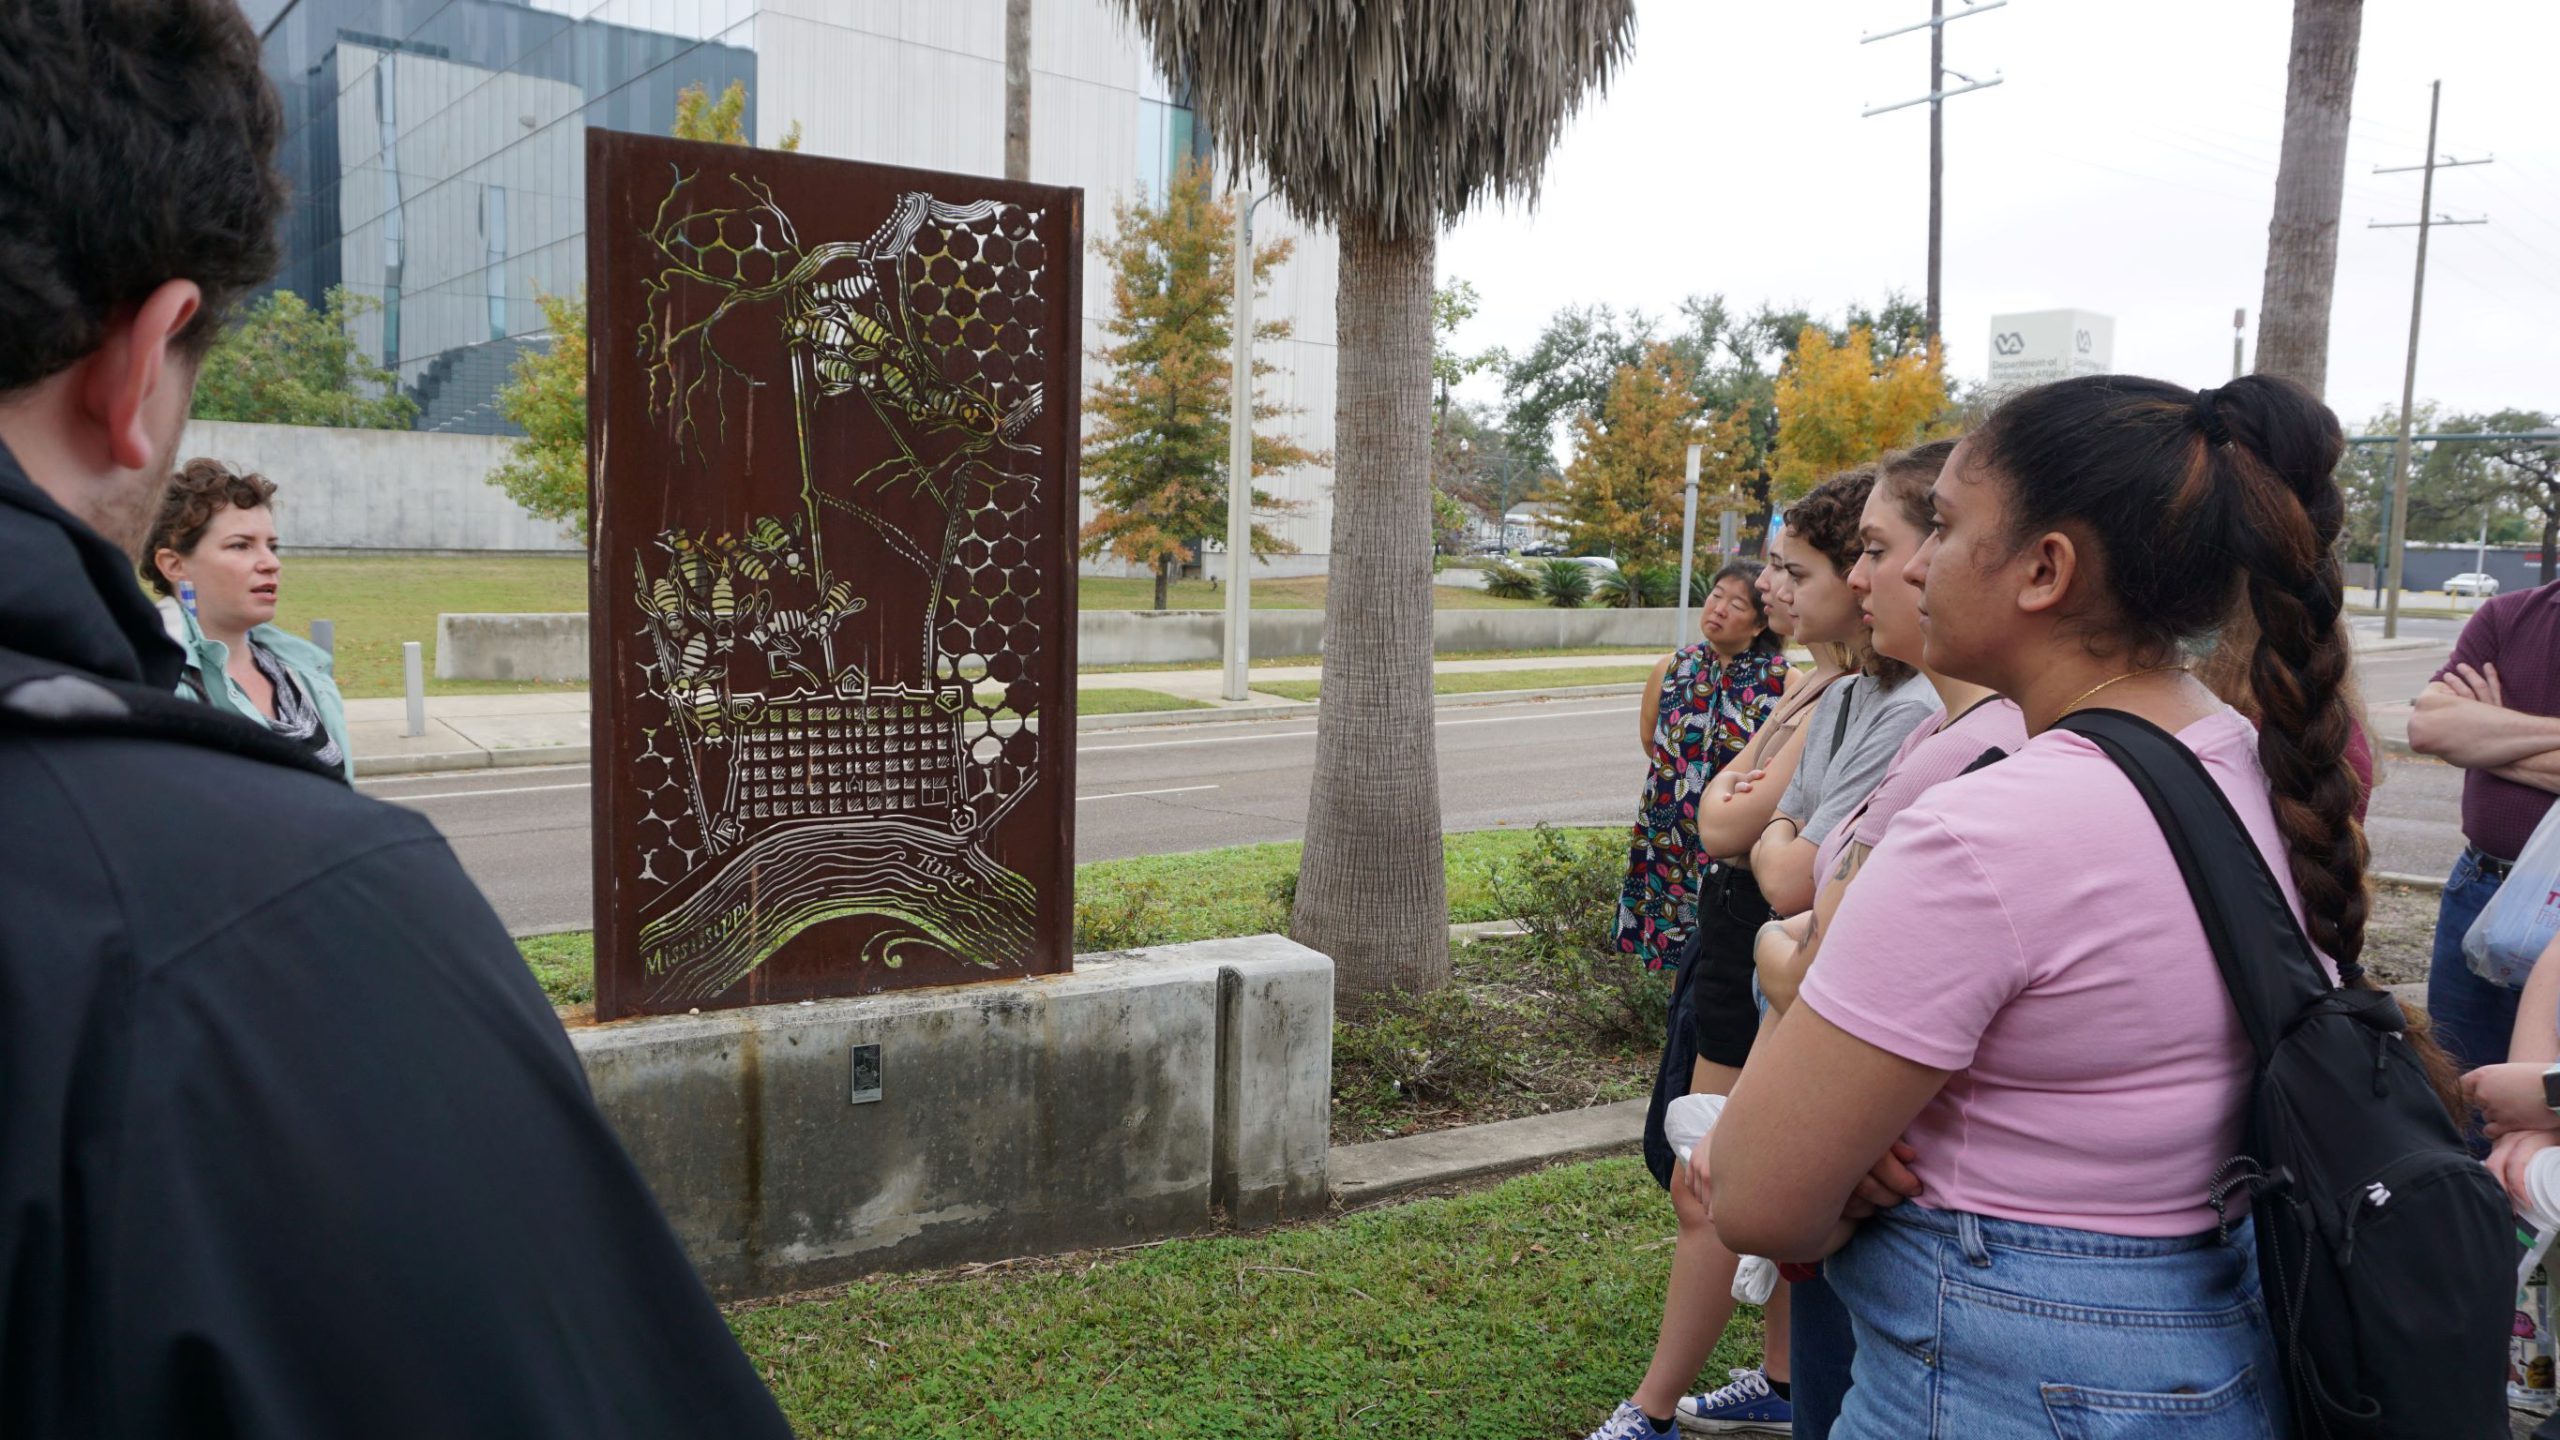 “The Spirit of Lower Mid-City:” A Conversation with Monica Kelly from People for Public Art